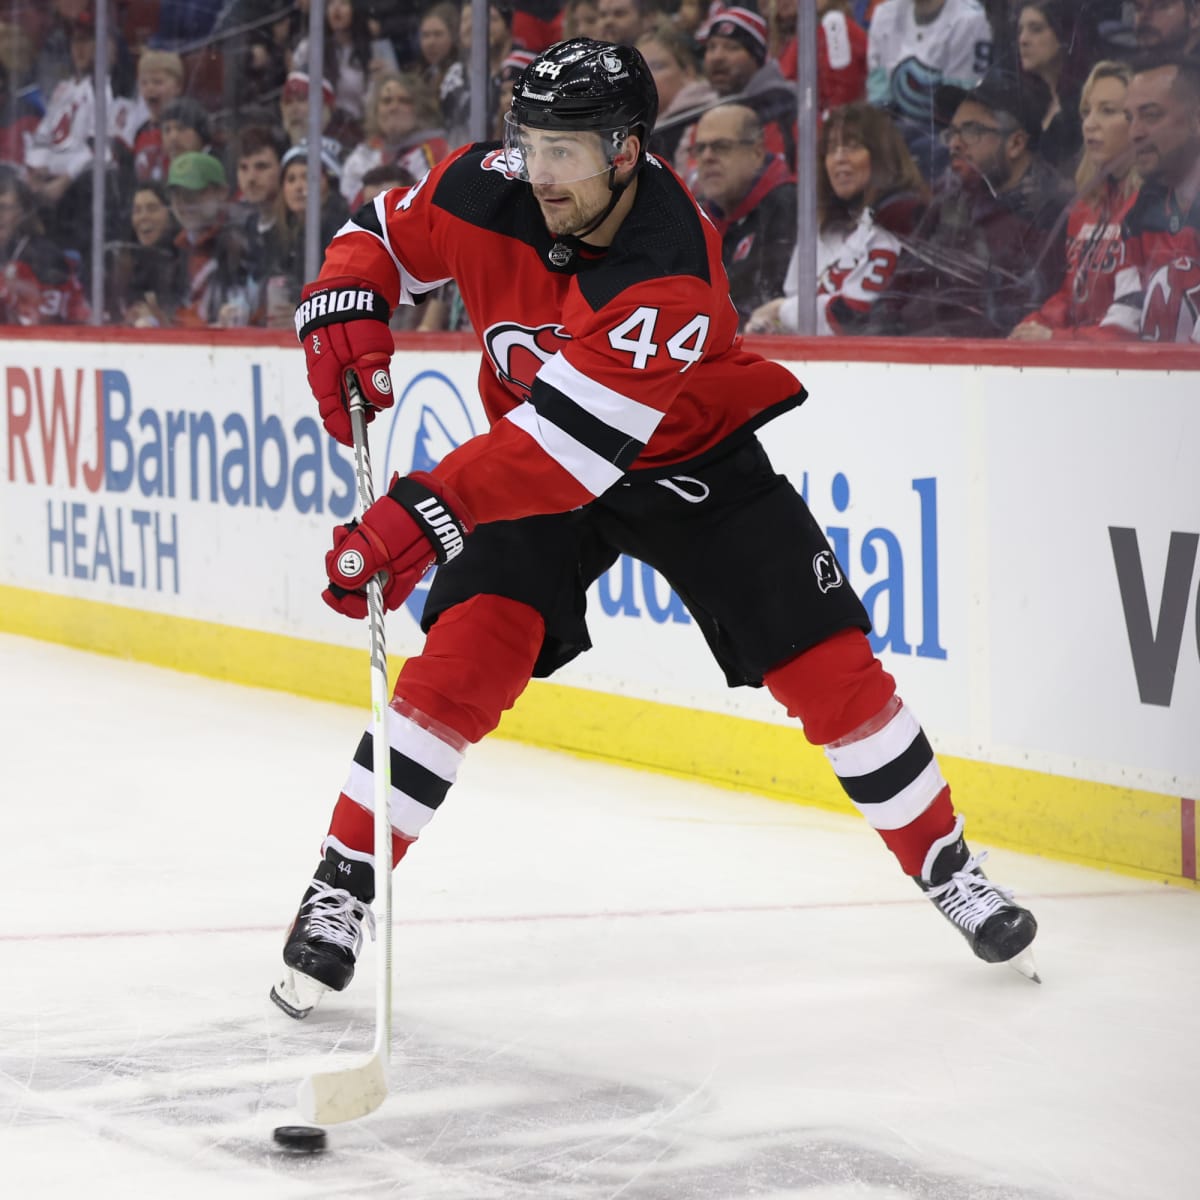 ICYMI: Miles Wood and the Devils have agreed to terms on a new